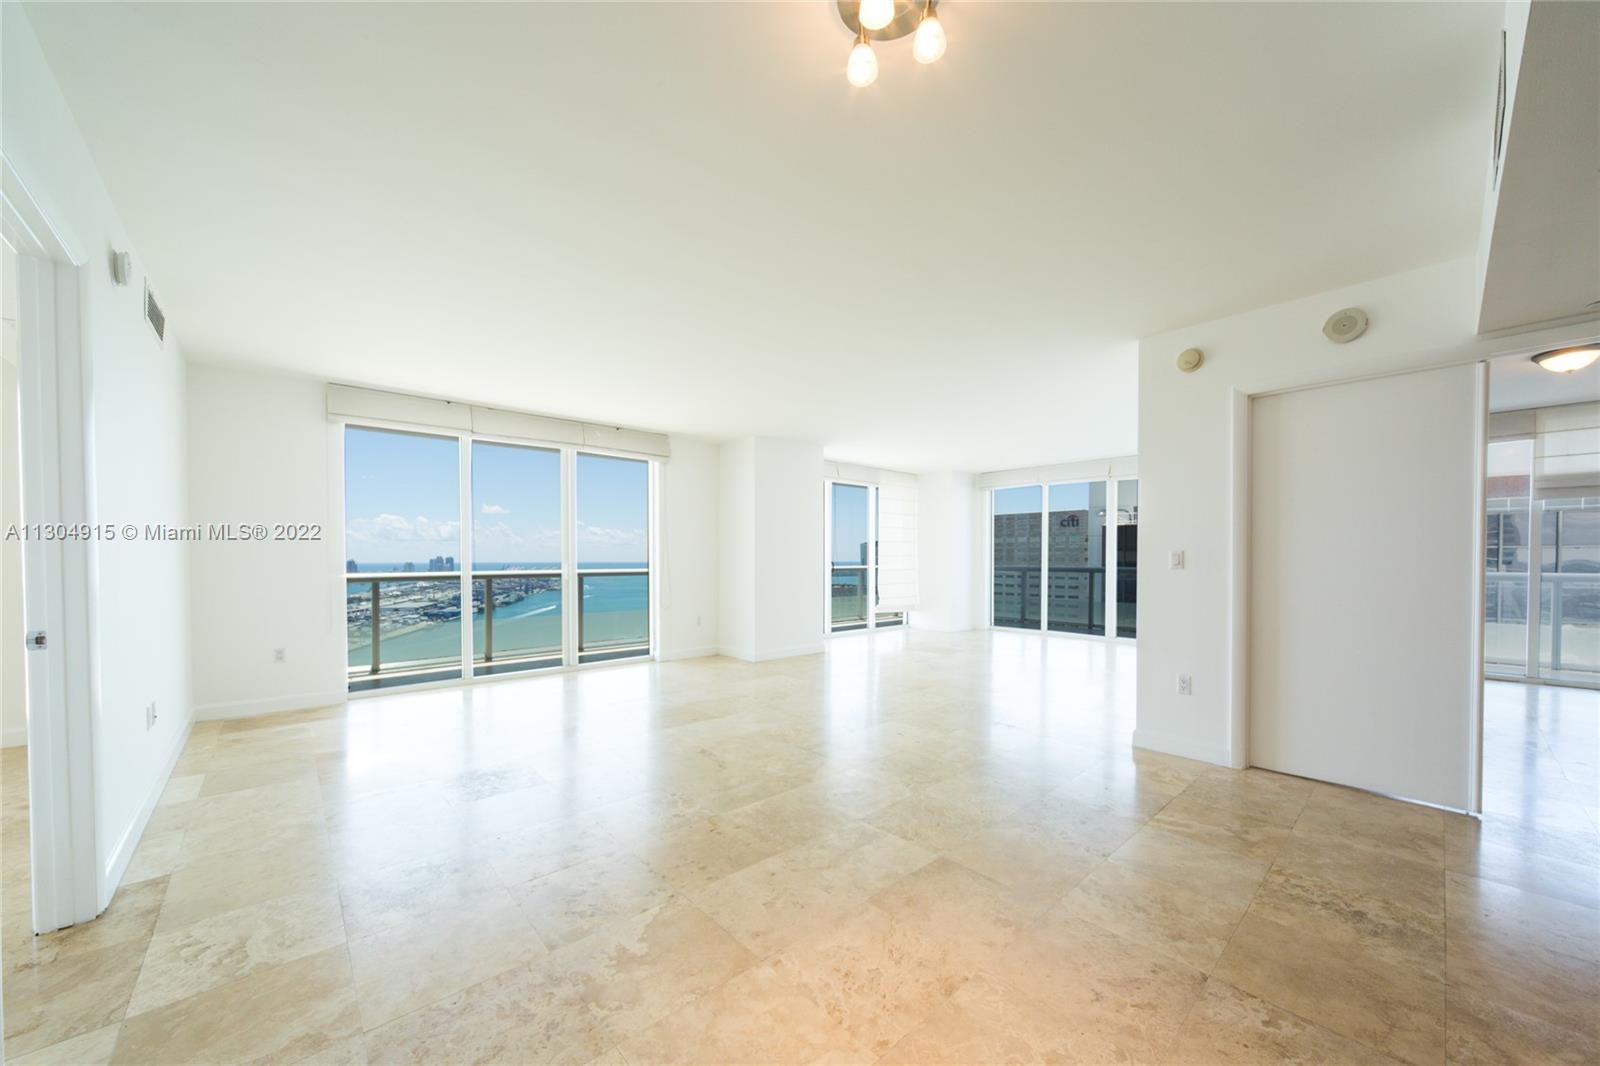 Beautiful three-bed, two-bath luxury condominium in the heart of downtown Miami with direct views of Biscayne Bay, Miami Beach, and Key Biscayne. 50 Biscayne building is full of 1st class amenities, and the location is ideal right across from Biscayne Park, Torch of Friendship, Bayside, FTX Arena, and both Frost/Perez museums. A 5-minute walk to Whole Foods and a 10-minute walk to Brickell.